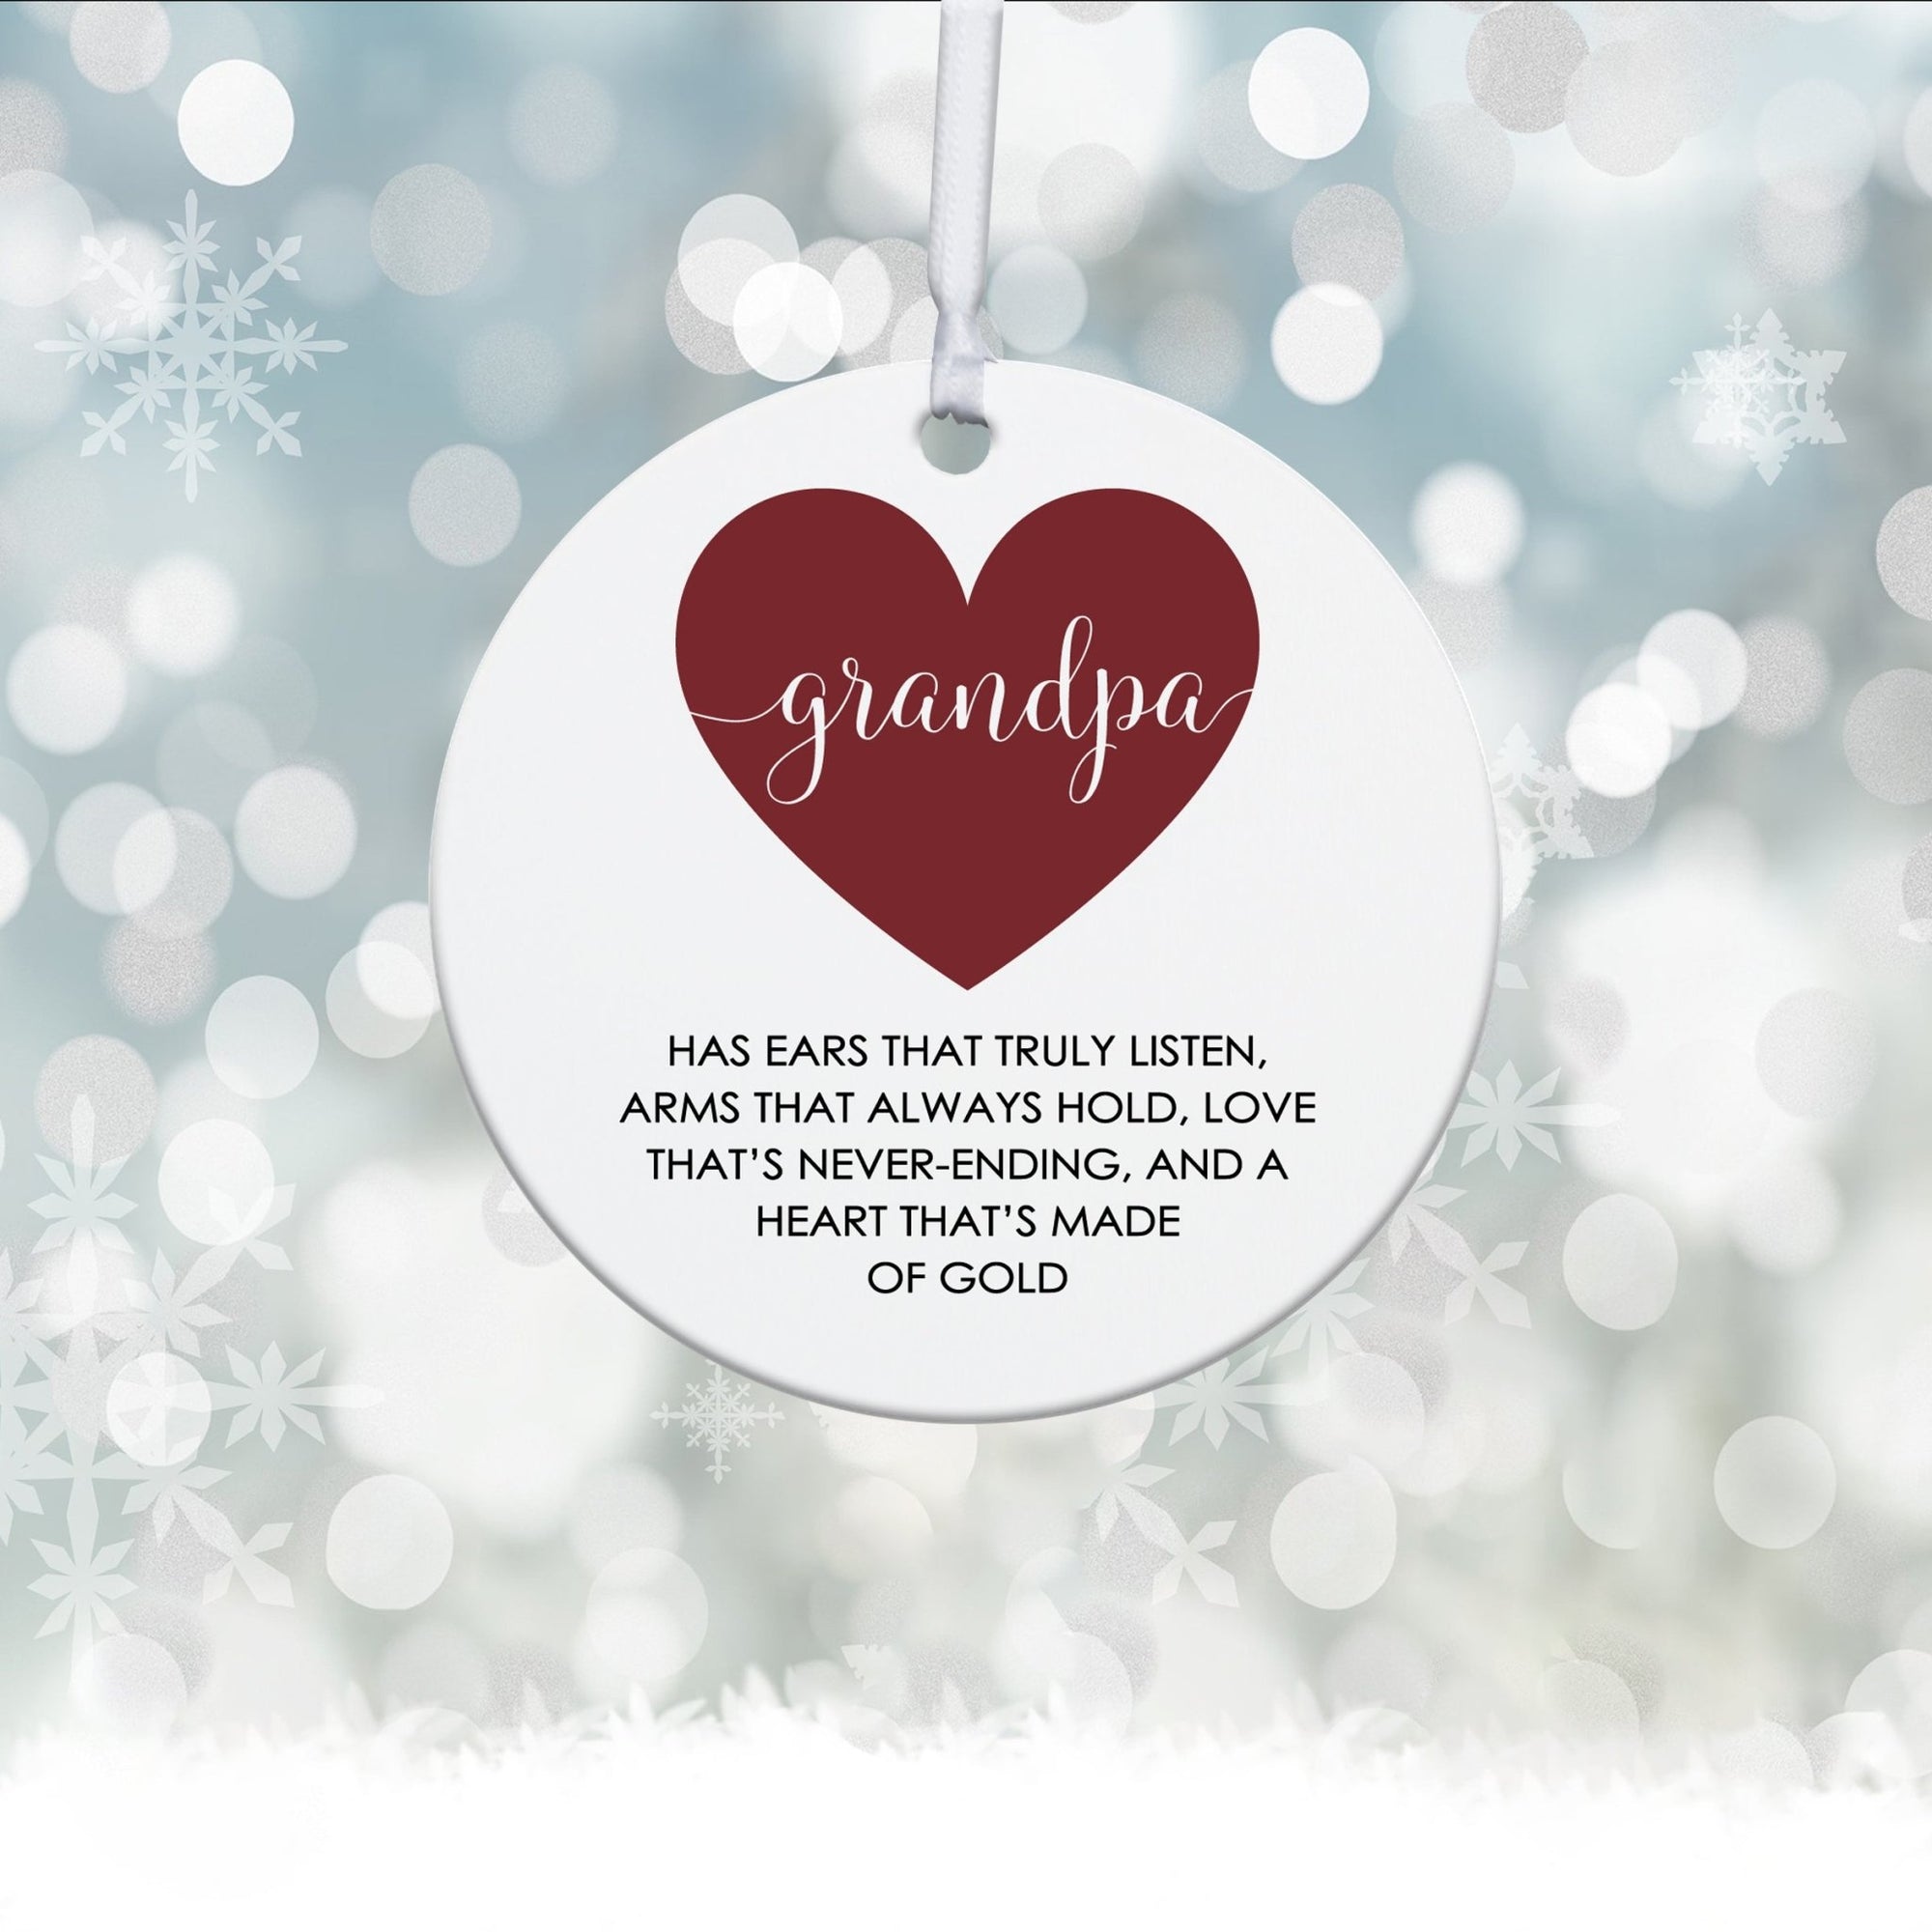 Grandparents White Ornament With Inspirational Message Gift Ideas - Grandpa Has Ears That Truly Listen (Heart) - LifeSong Milestones